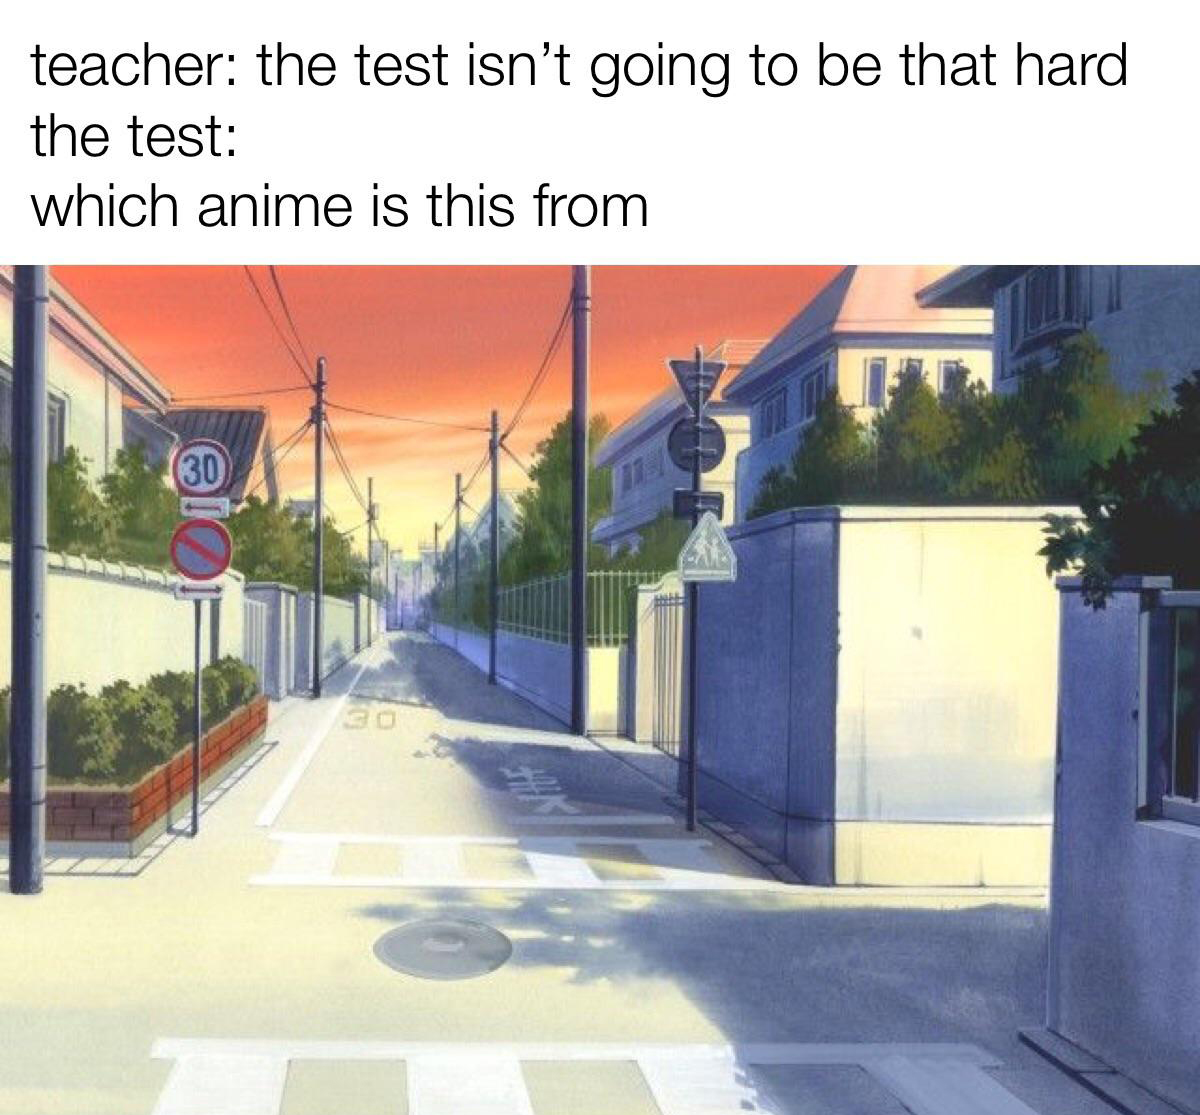 dank memes - funny memes - starter pack meme high school - teacher the test isn't going to be that hard the test which anime is this from 30